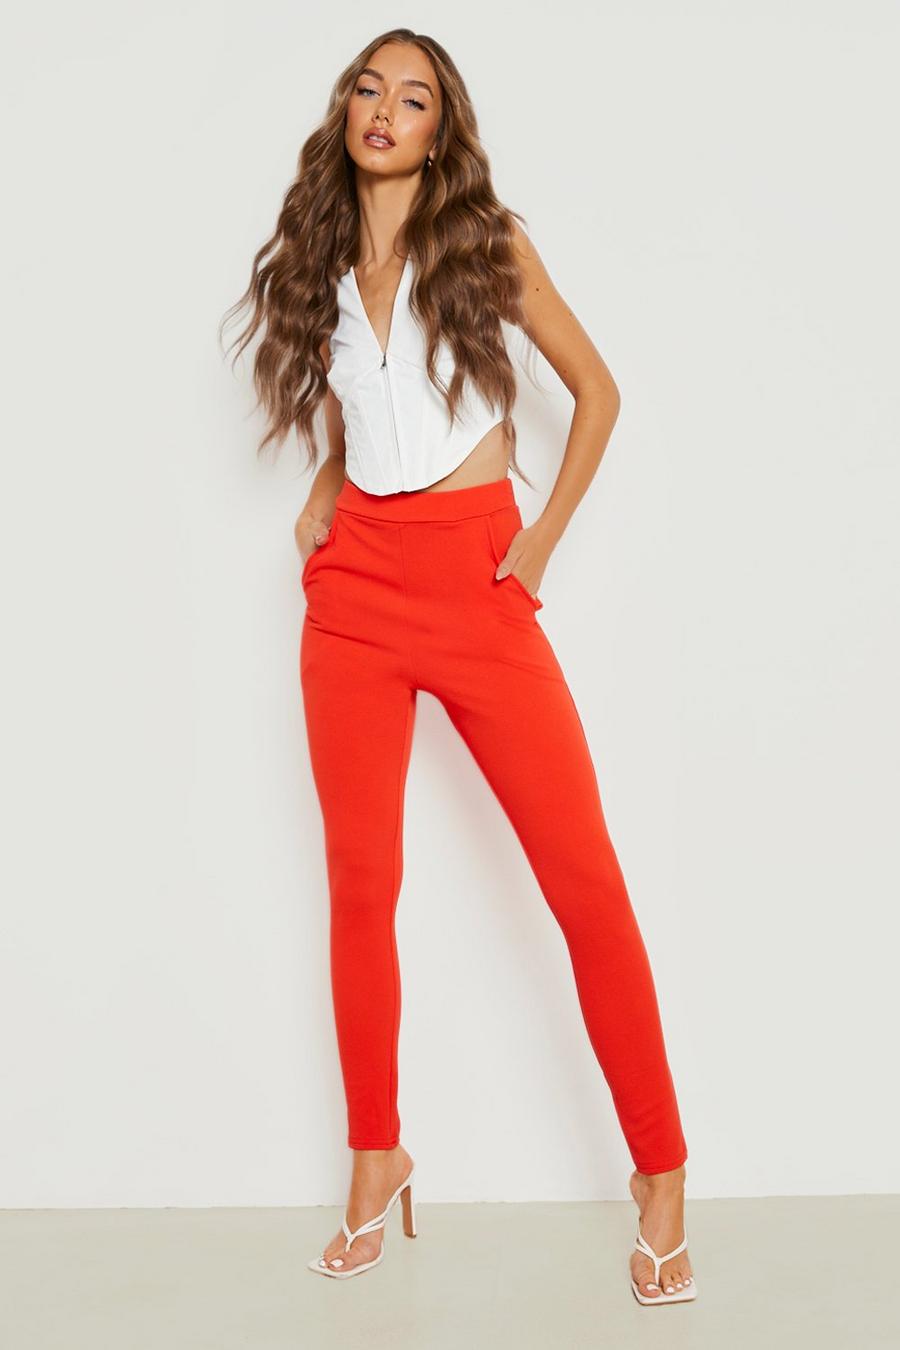 High Waisted Red Womens Pants, Pencil Cigarette Trousers Women, High Rise  Business Slit Fitted Women's Pants TAVROVSKA 